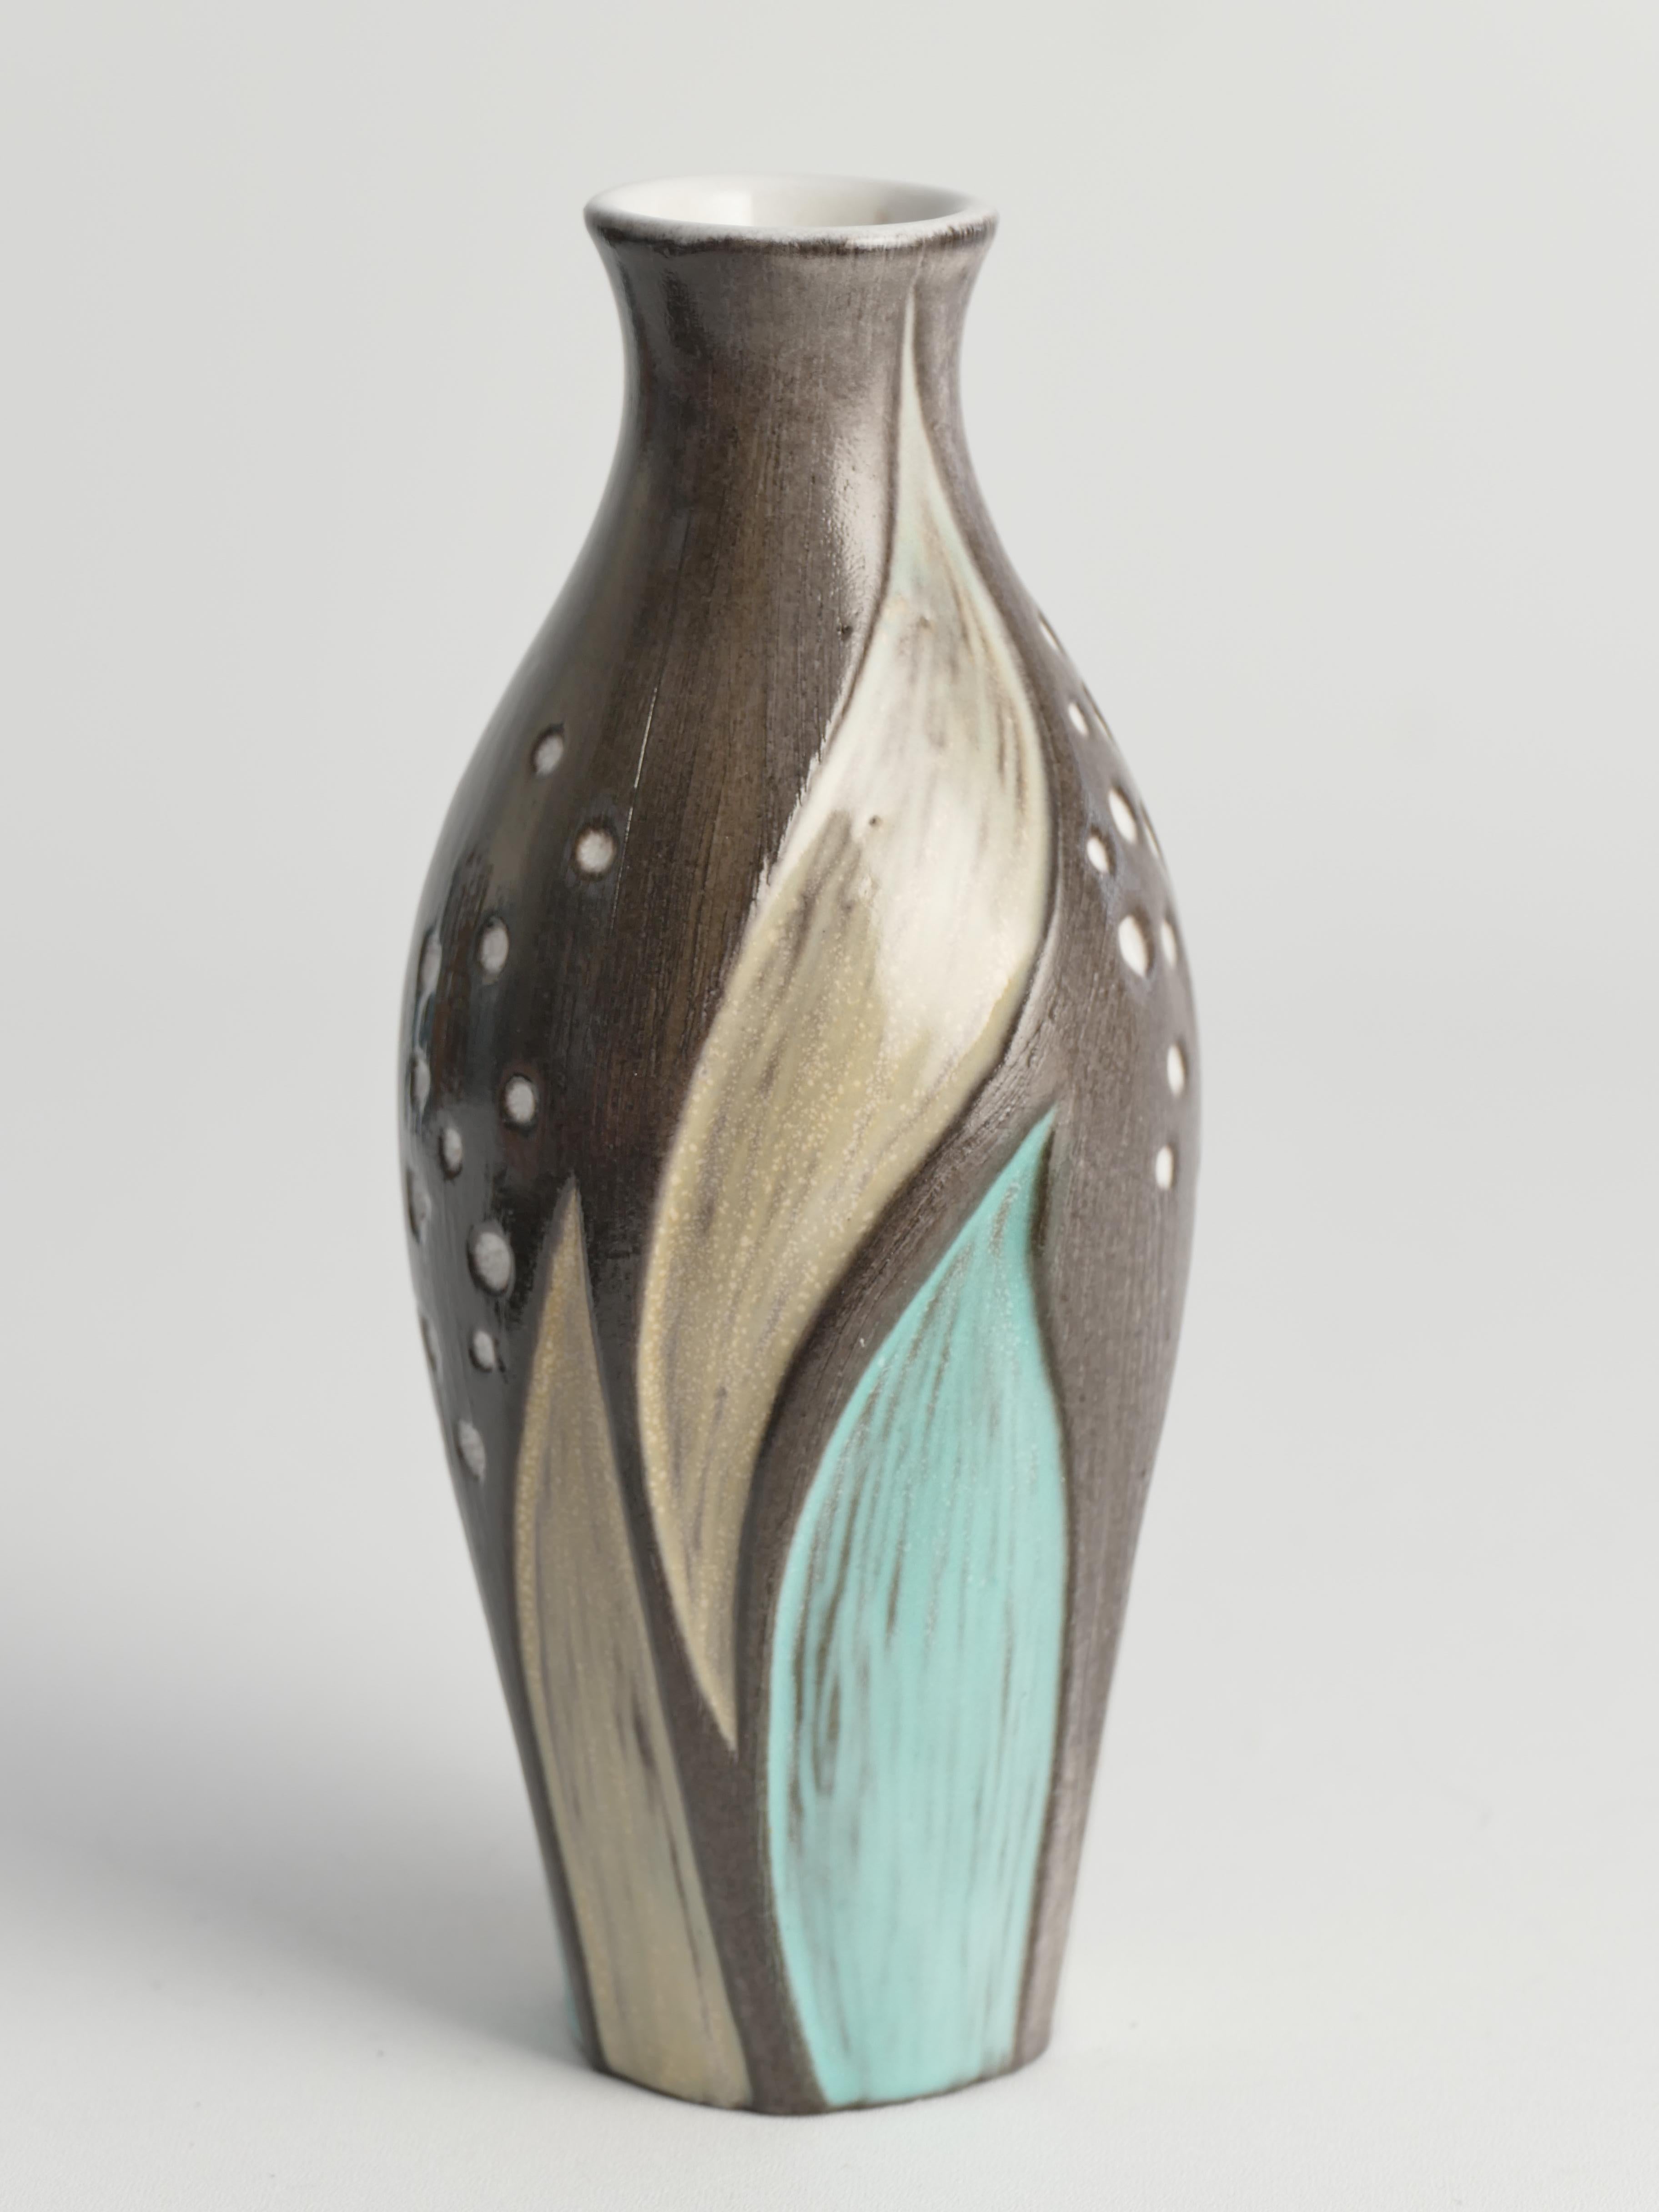 Ceramic Vase with Seaweed Motif by Mari Simmulson for Upsala Ekeby, Sweden 1950s For Sale 1